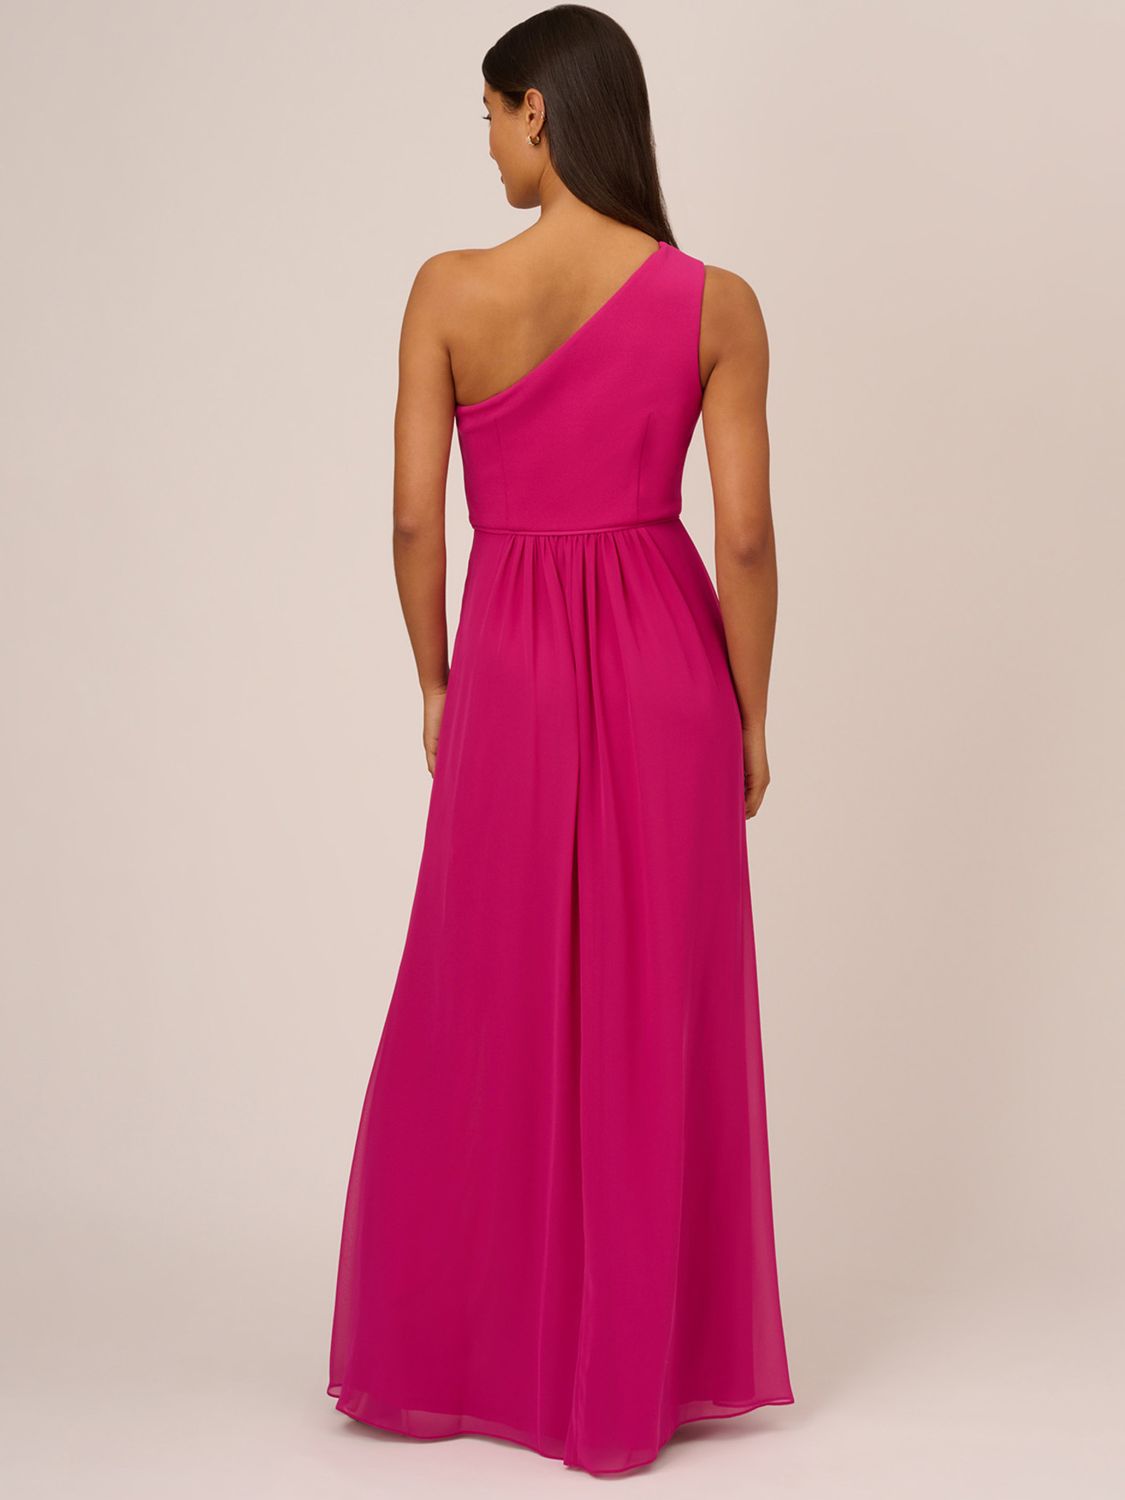 Adrianna Papell One Shoulder Chiffon Gown, Bright Magenta, 6